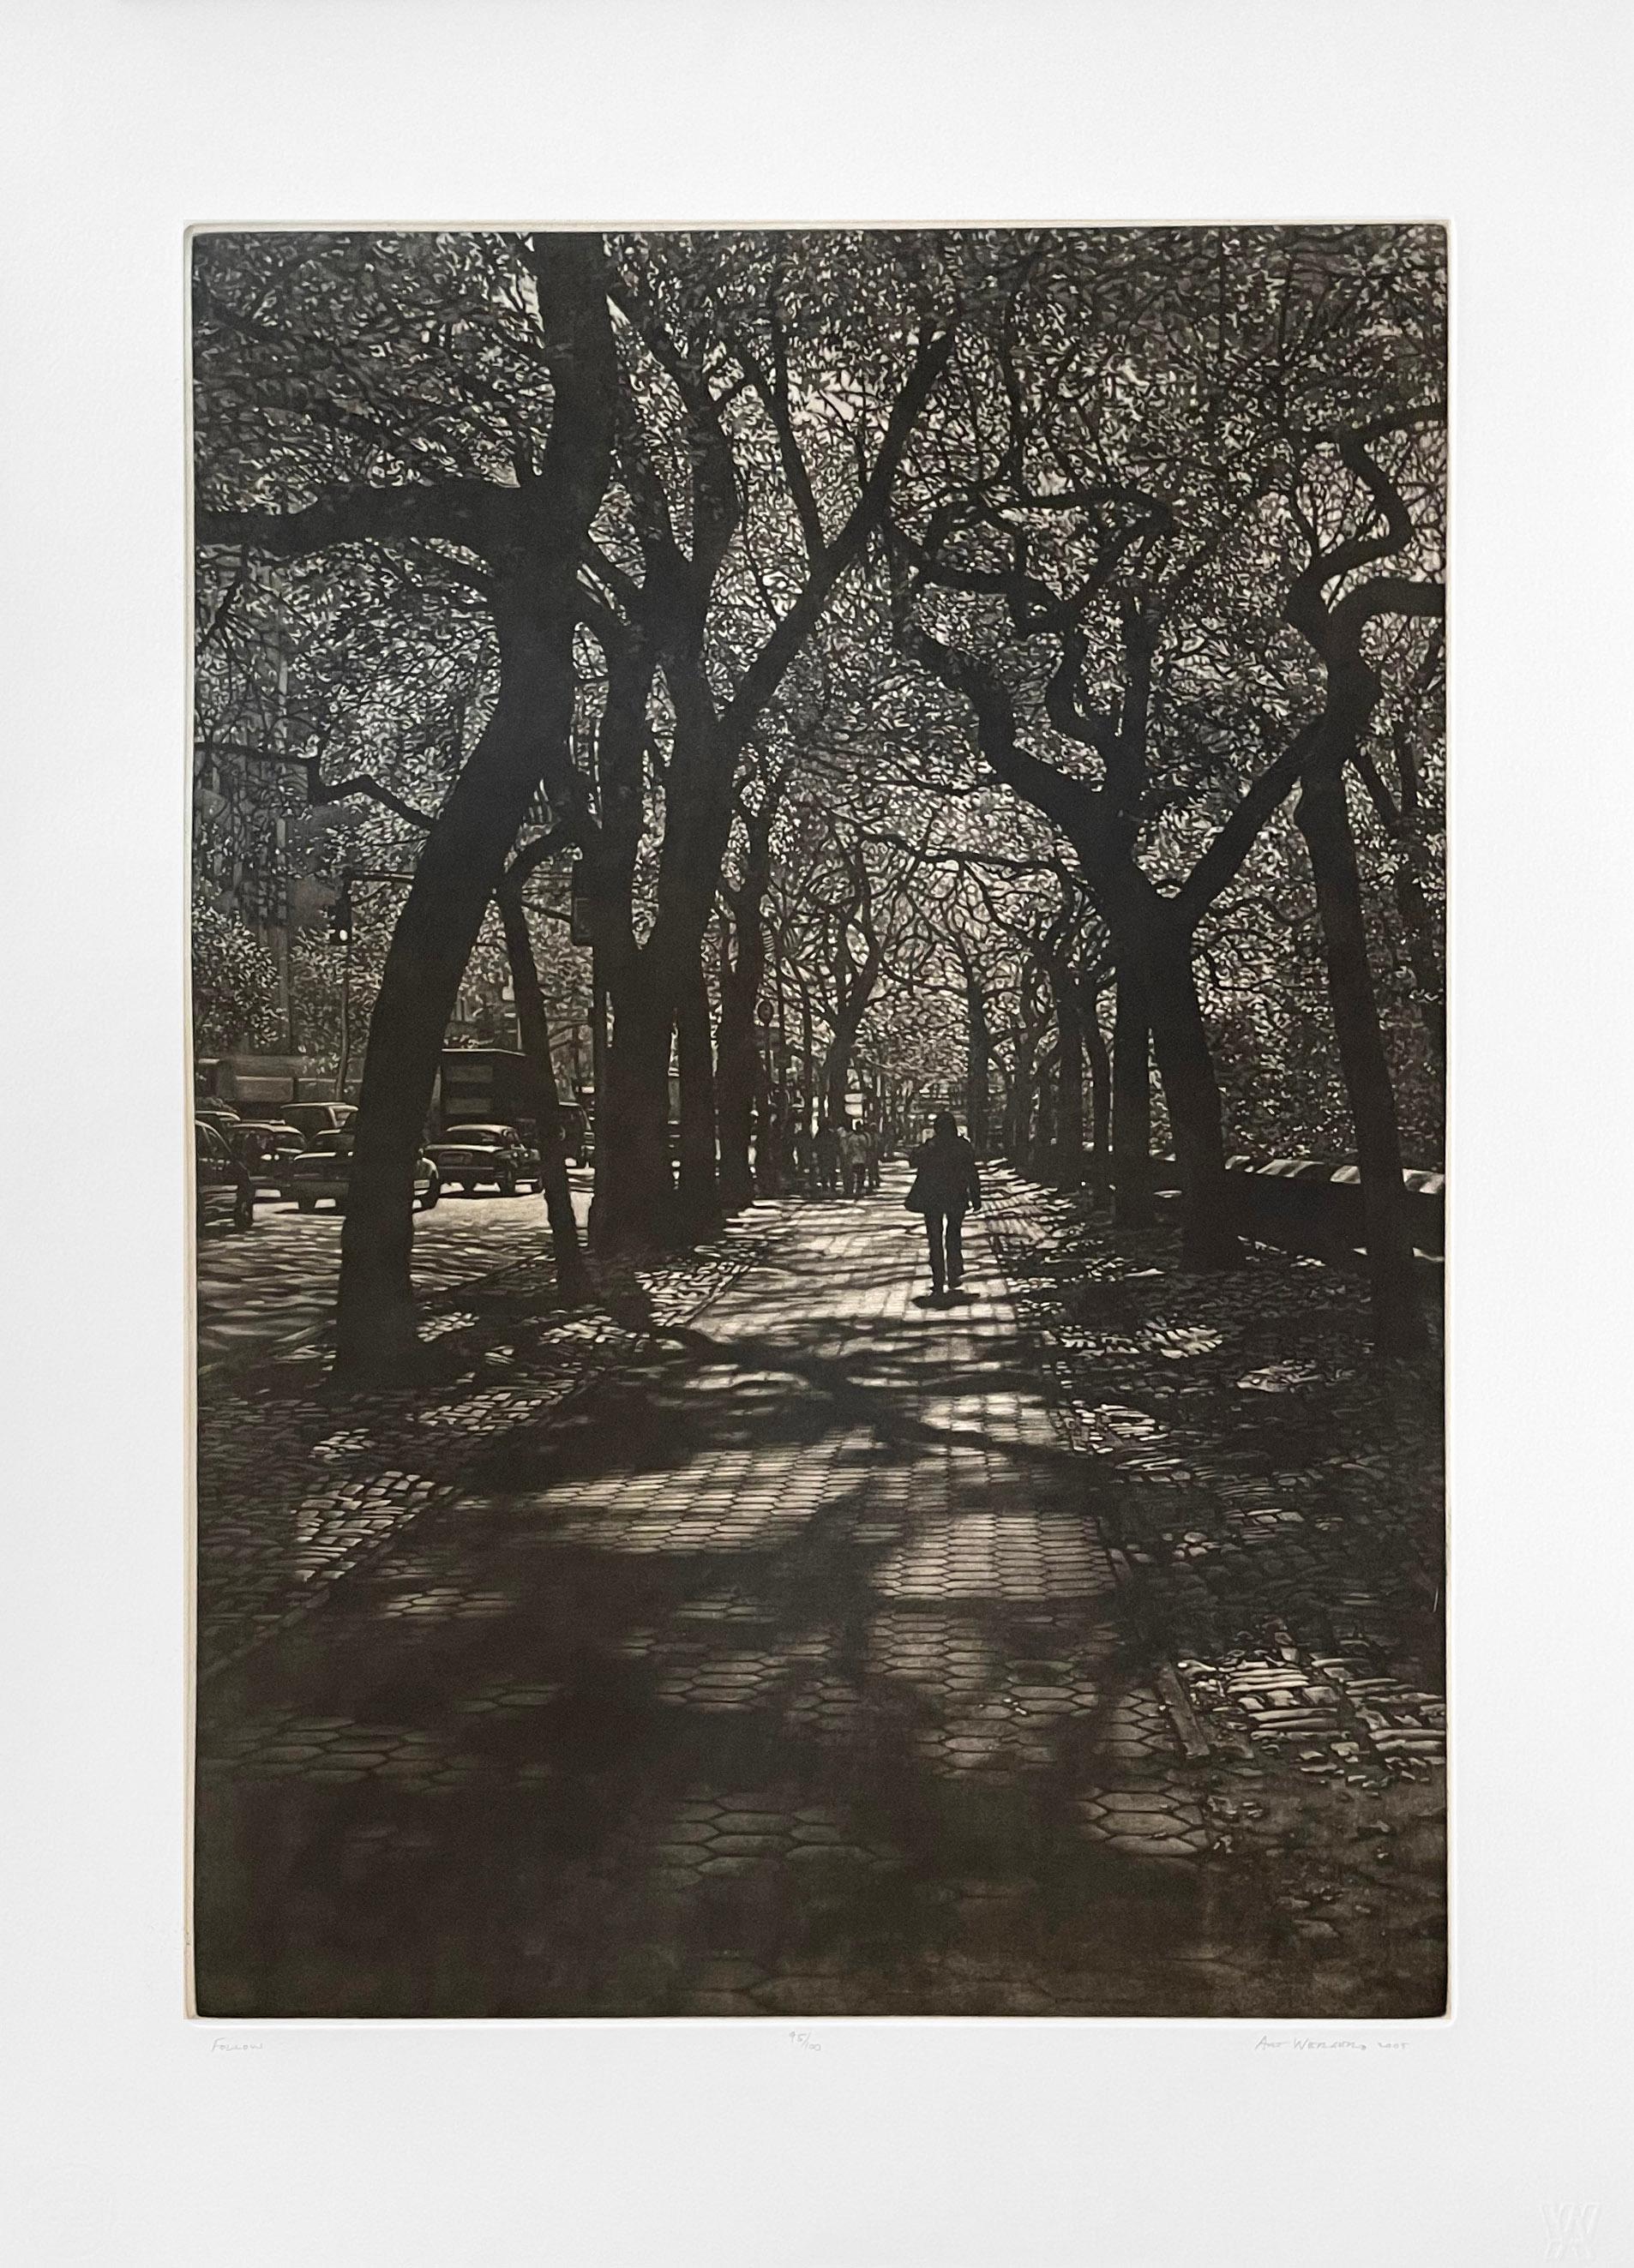 Mezzotint, from the edition of 100. Signed, titled and numbered by the artist.

Art Werger’s prints show a keen observation of quiet and normally unnoticed moments. Pedestrians passing each other, lost in their own worlds. Sunlight filtering through